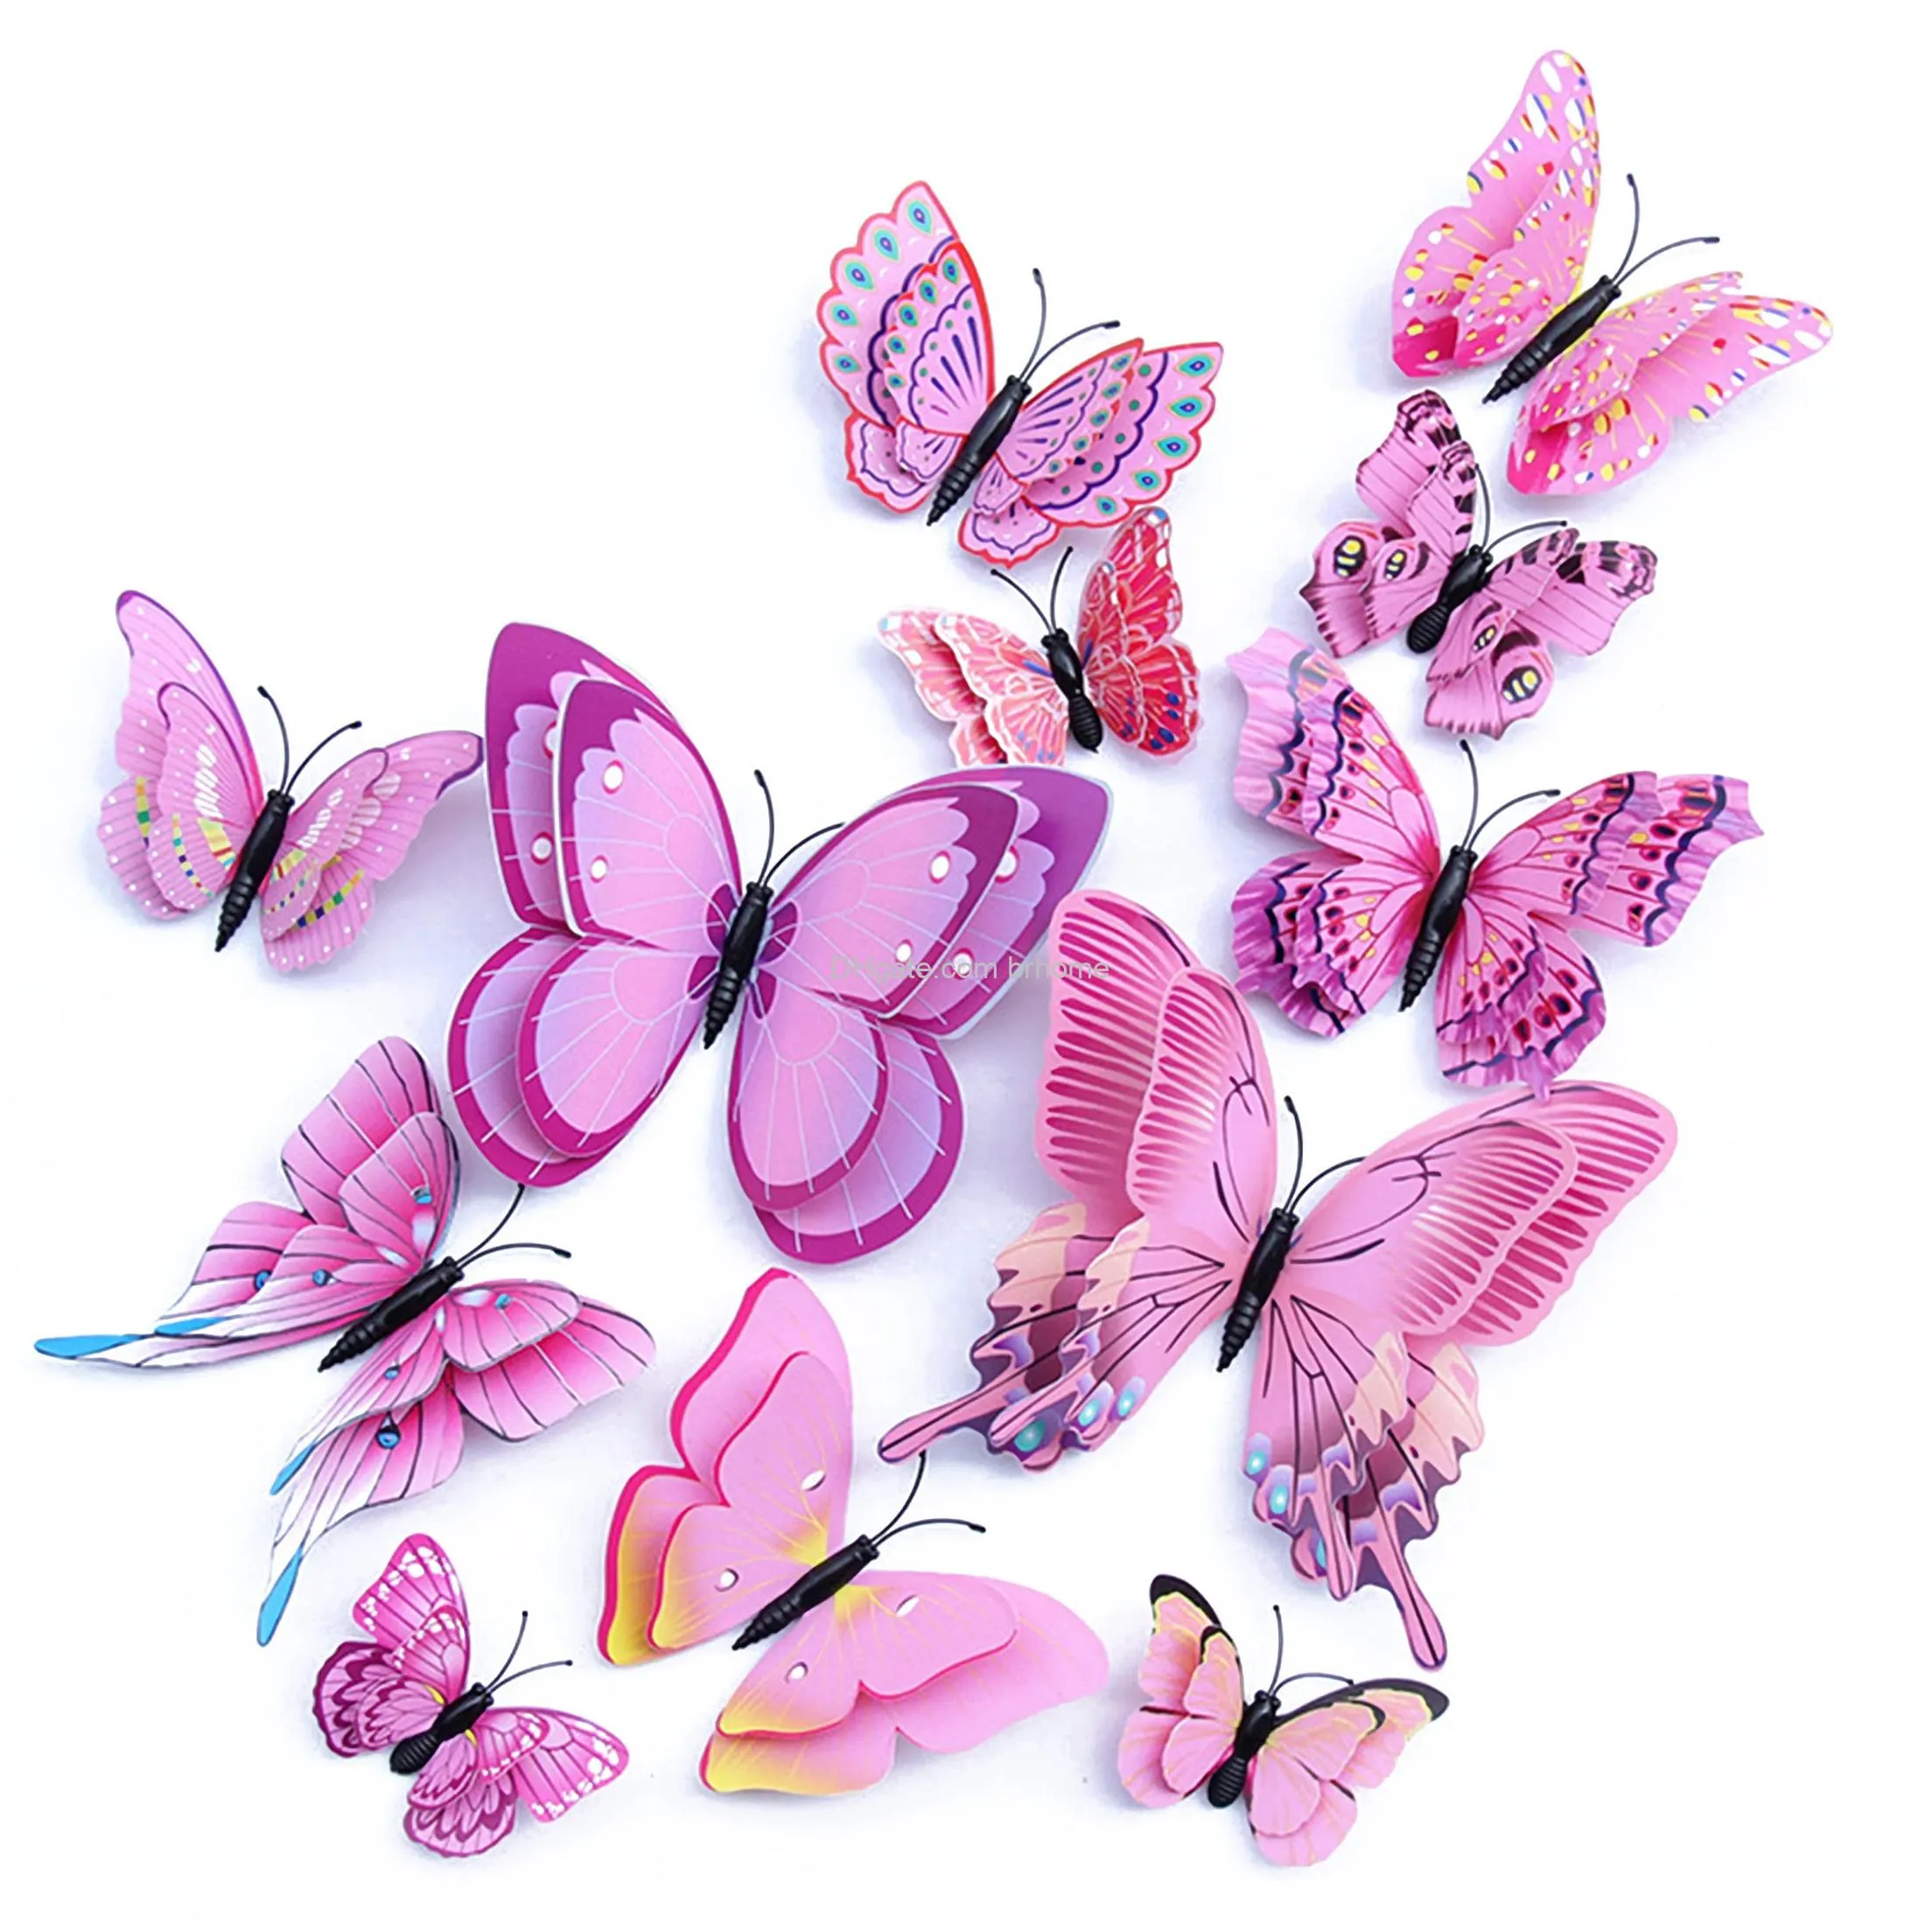 pack of 60 butterfly cupcake toppers cake party cake decorations mixed colour for birthday wedding party wall decoration upgraded version